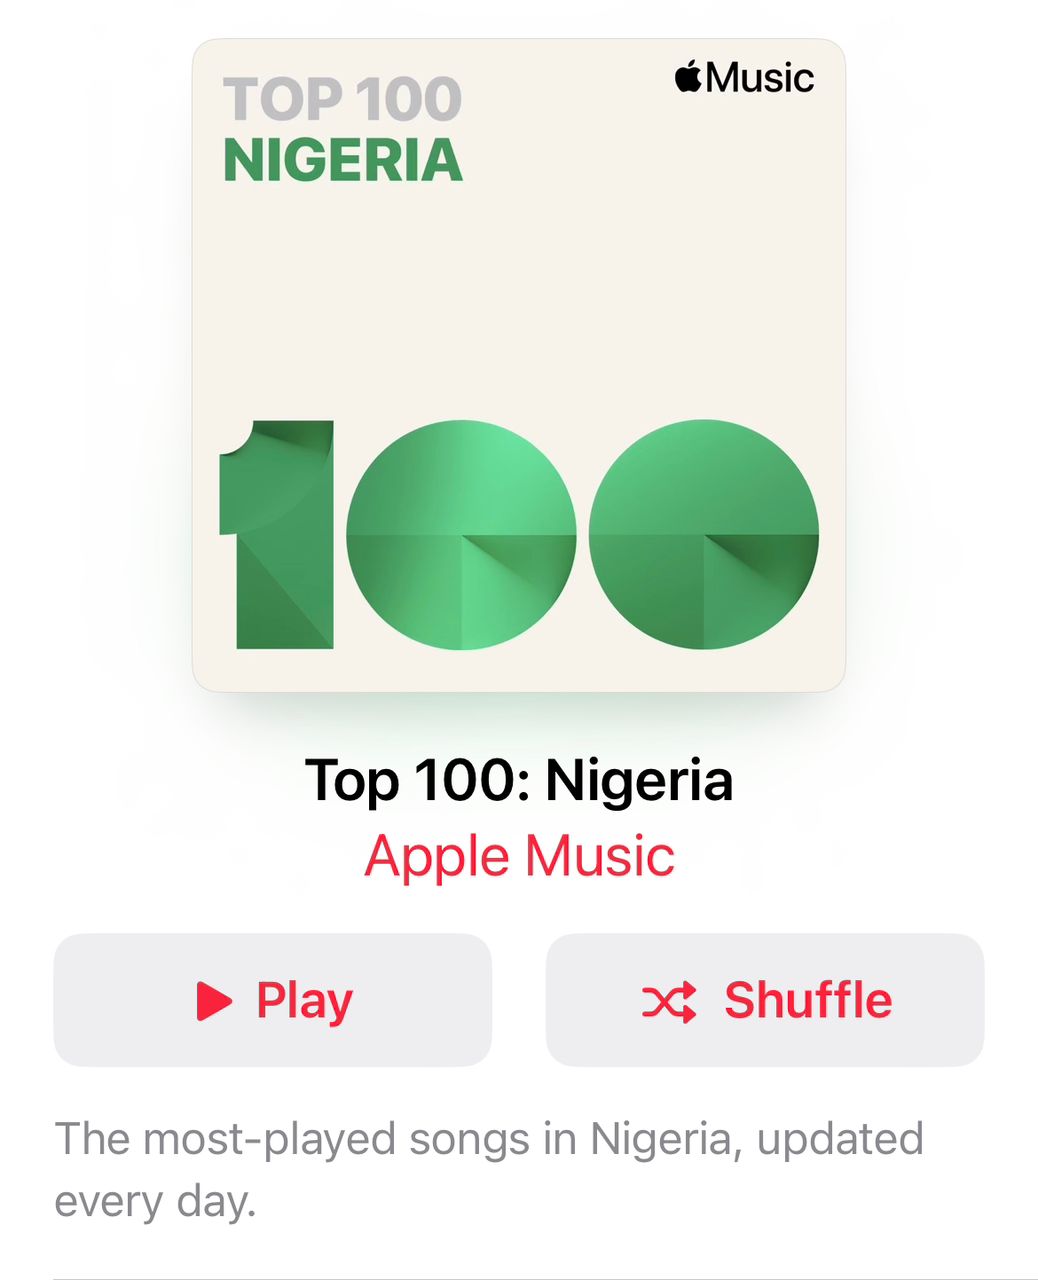 Asake, Tiwa, Others, booted out as Wizkid occupies 1 to 12 on Apple Music Top 100 after album release [photos]